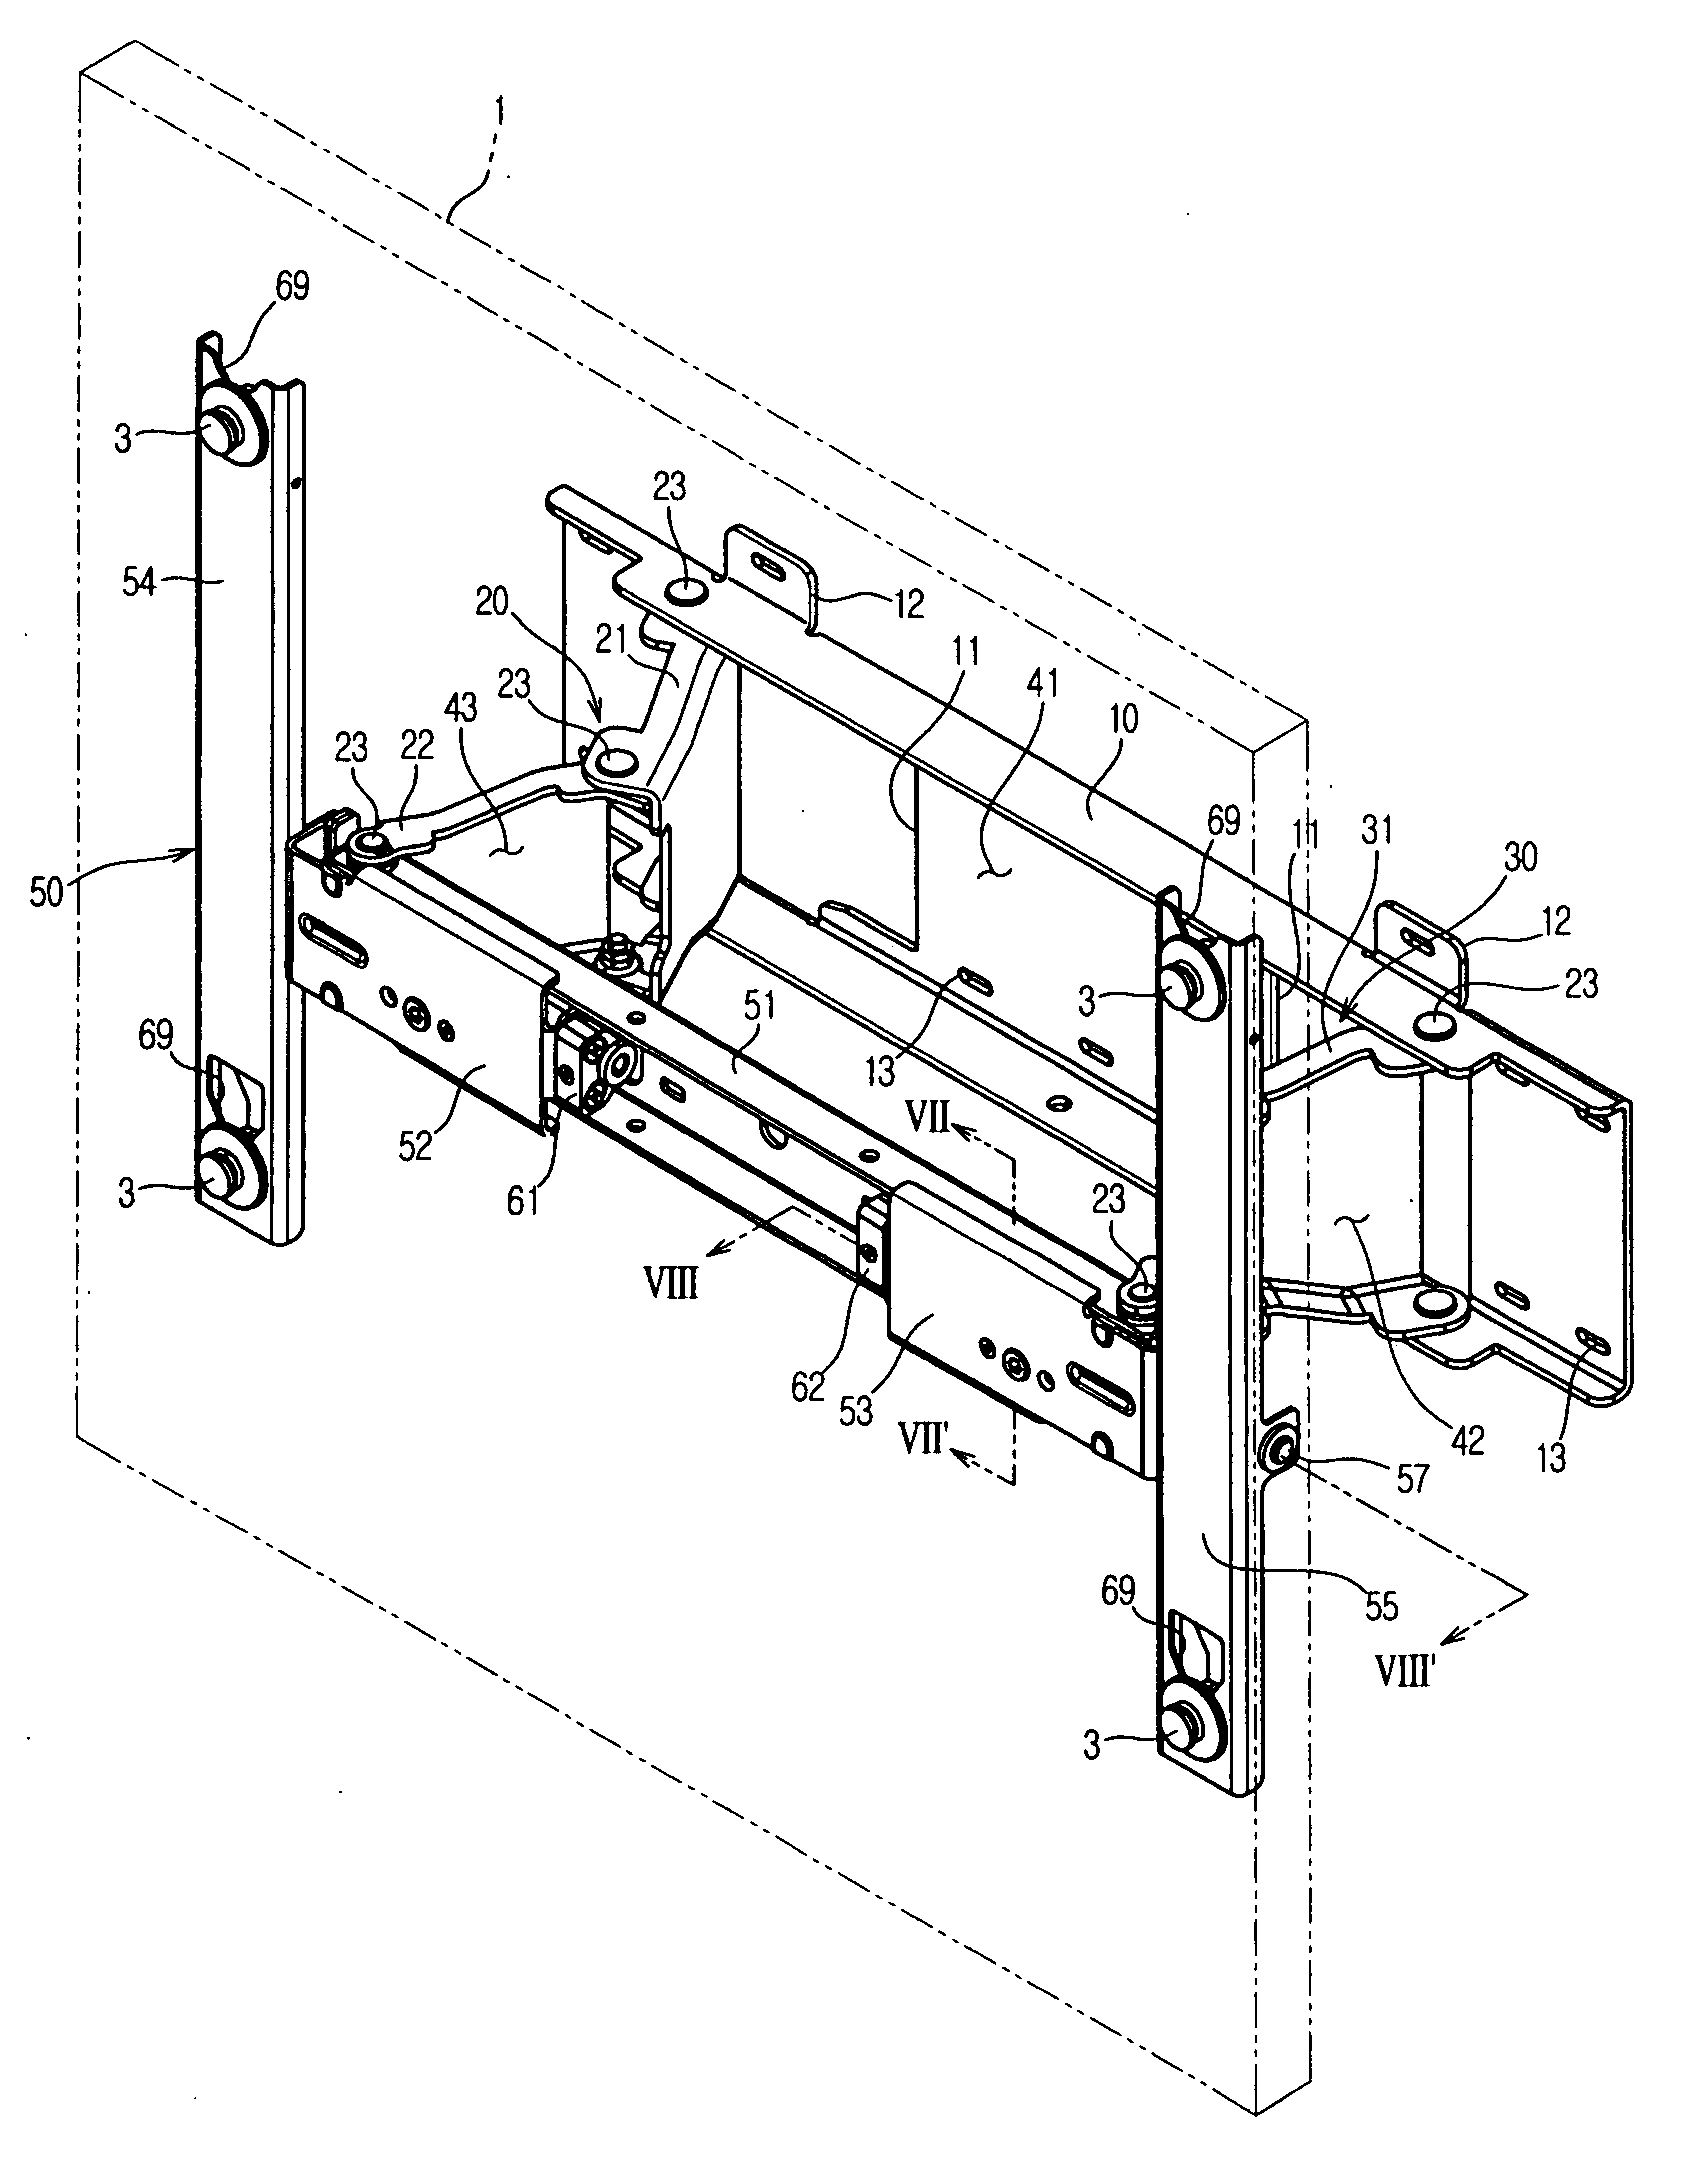 Supporting device of a display unit capable of horizontal and vertical rotation